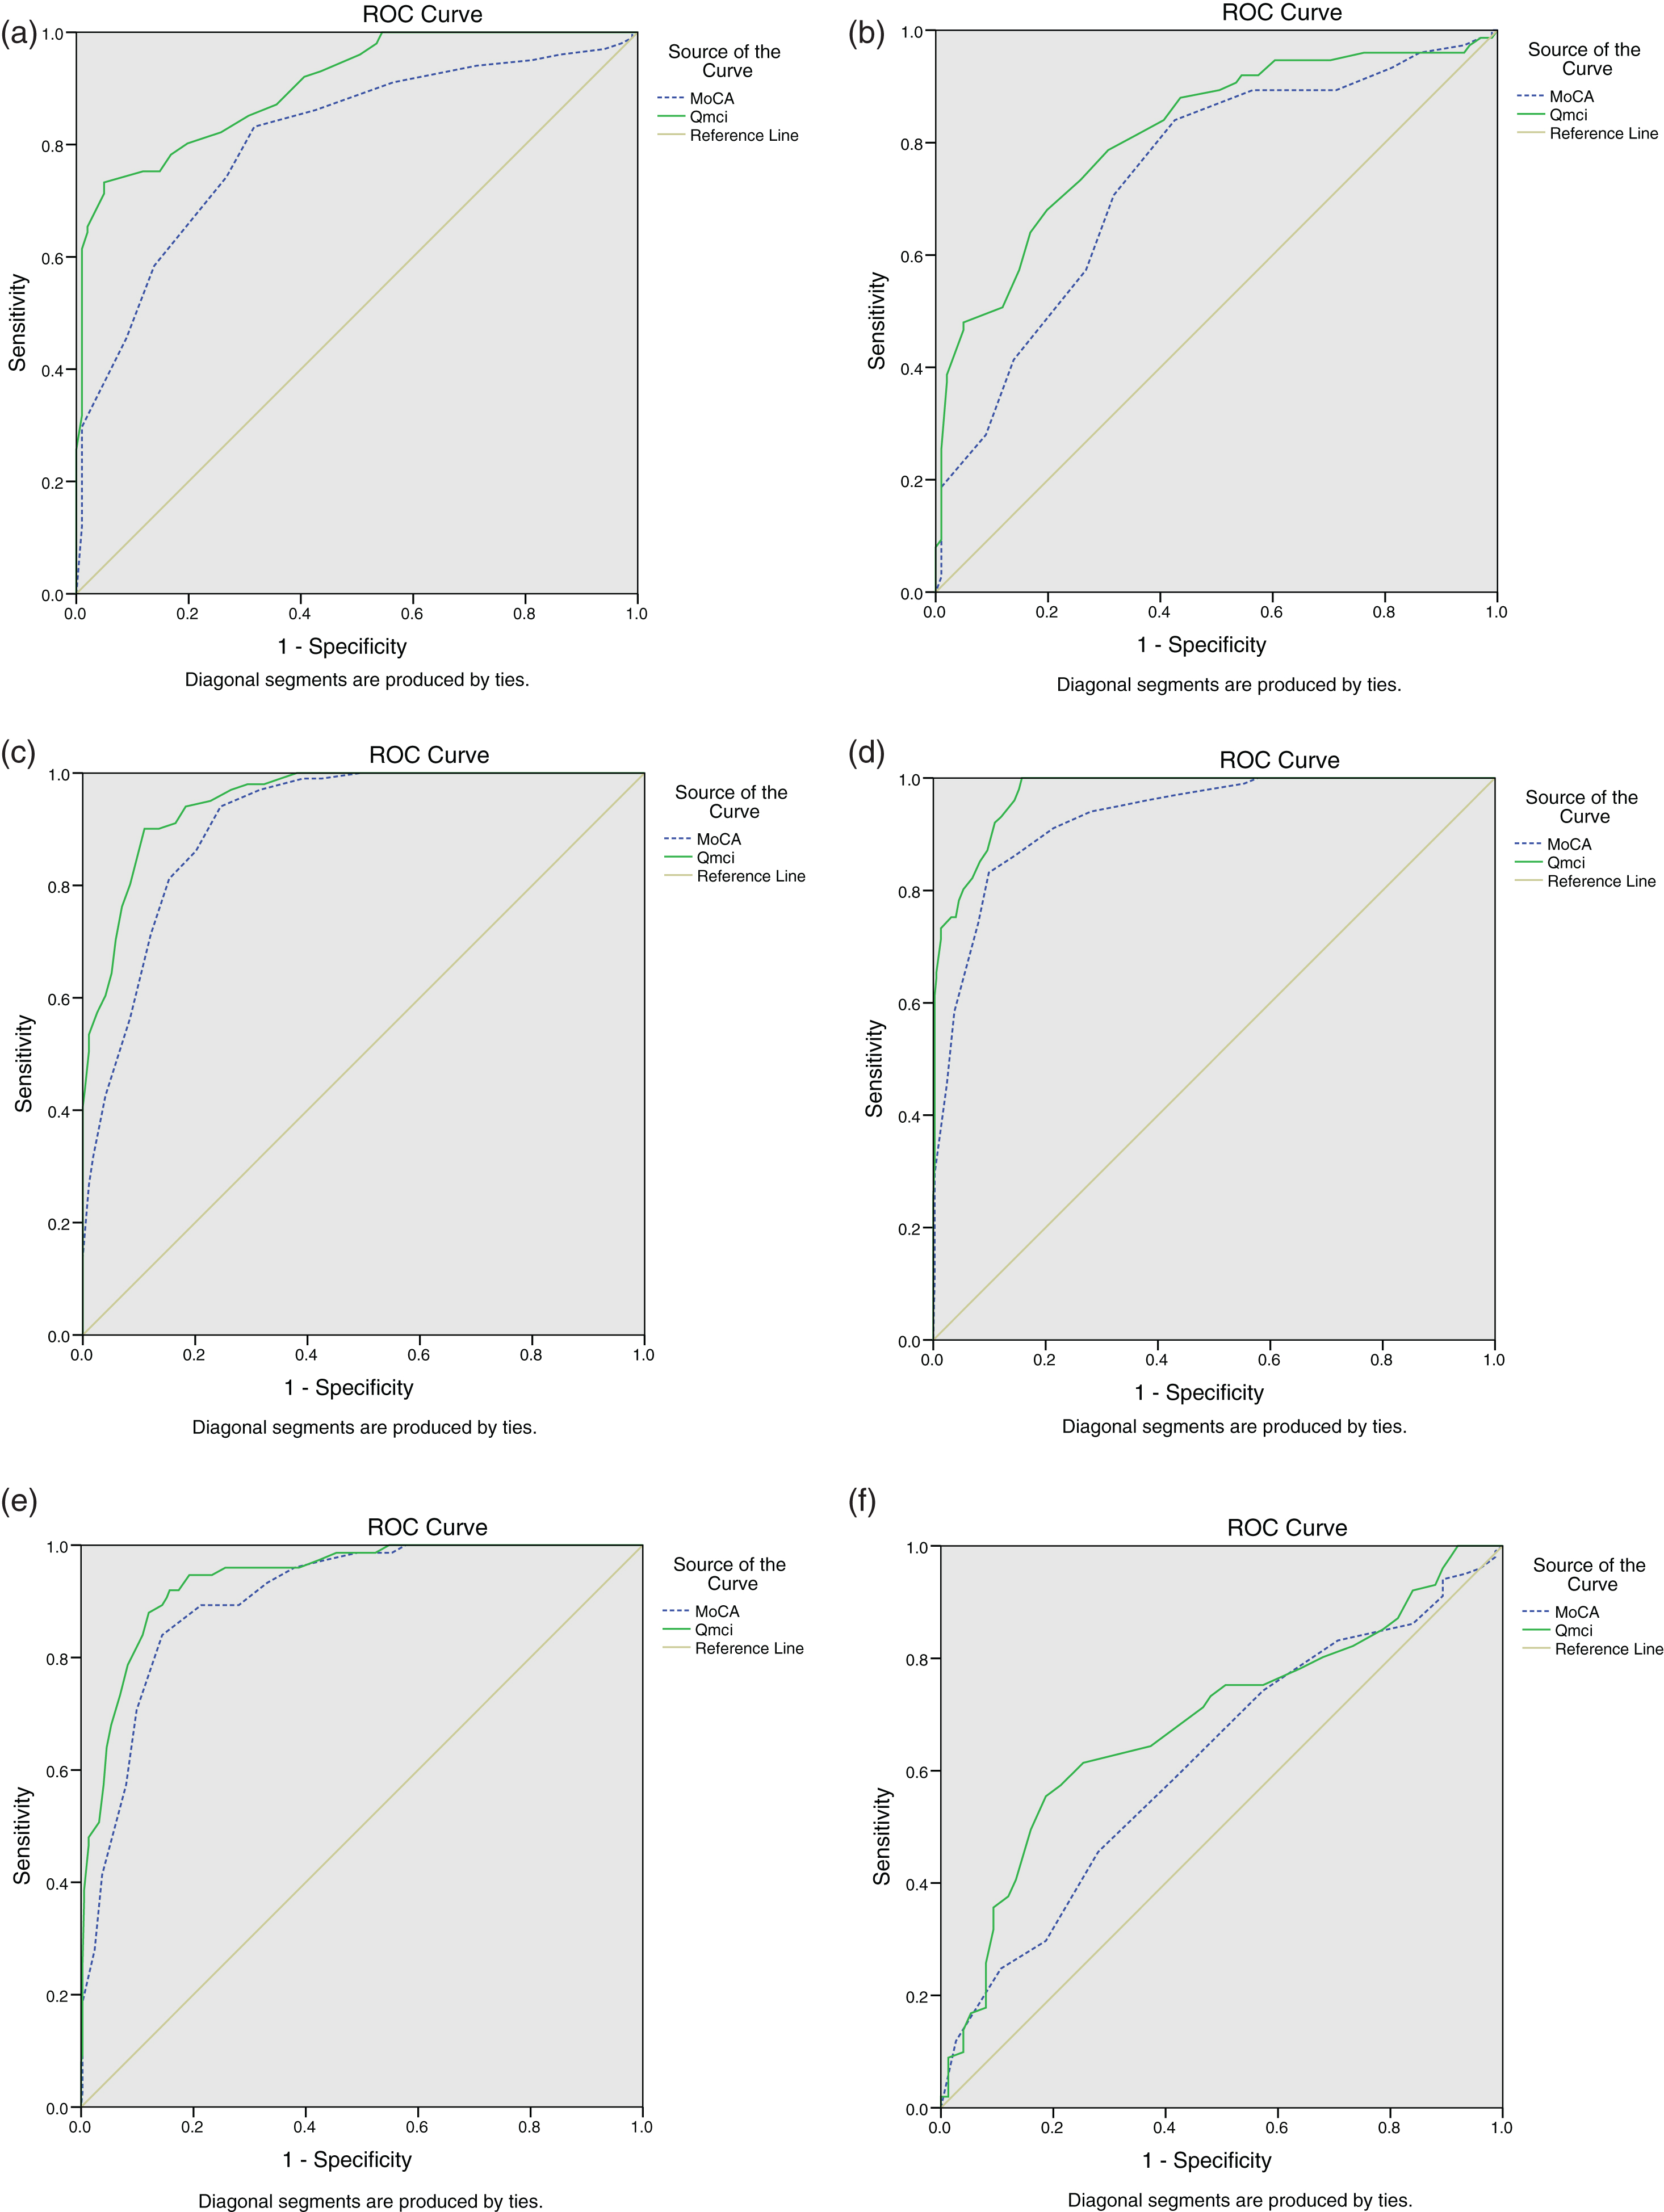 Receiver Operating Characteristic curves demonstrating the accuracy of the Quick Mild Cognitive Impairment (Qmci) screen and Montreal Cognitive Assessment (MoCA) in differentiating (a) mild cognitive impairment (MCI) from normal controls, (b) MCI from subjective memory complaints (SMC), (c) MCI and dementia, (d) normal controls from cognitive impairment (MCI and dementia), (e) SMC from cognitive impairment, and (f) SMC from normal controls.